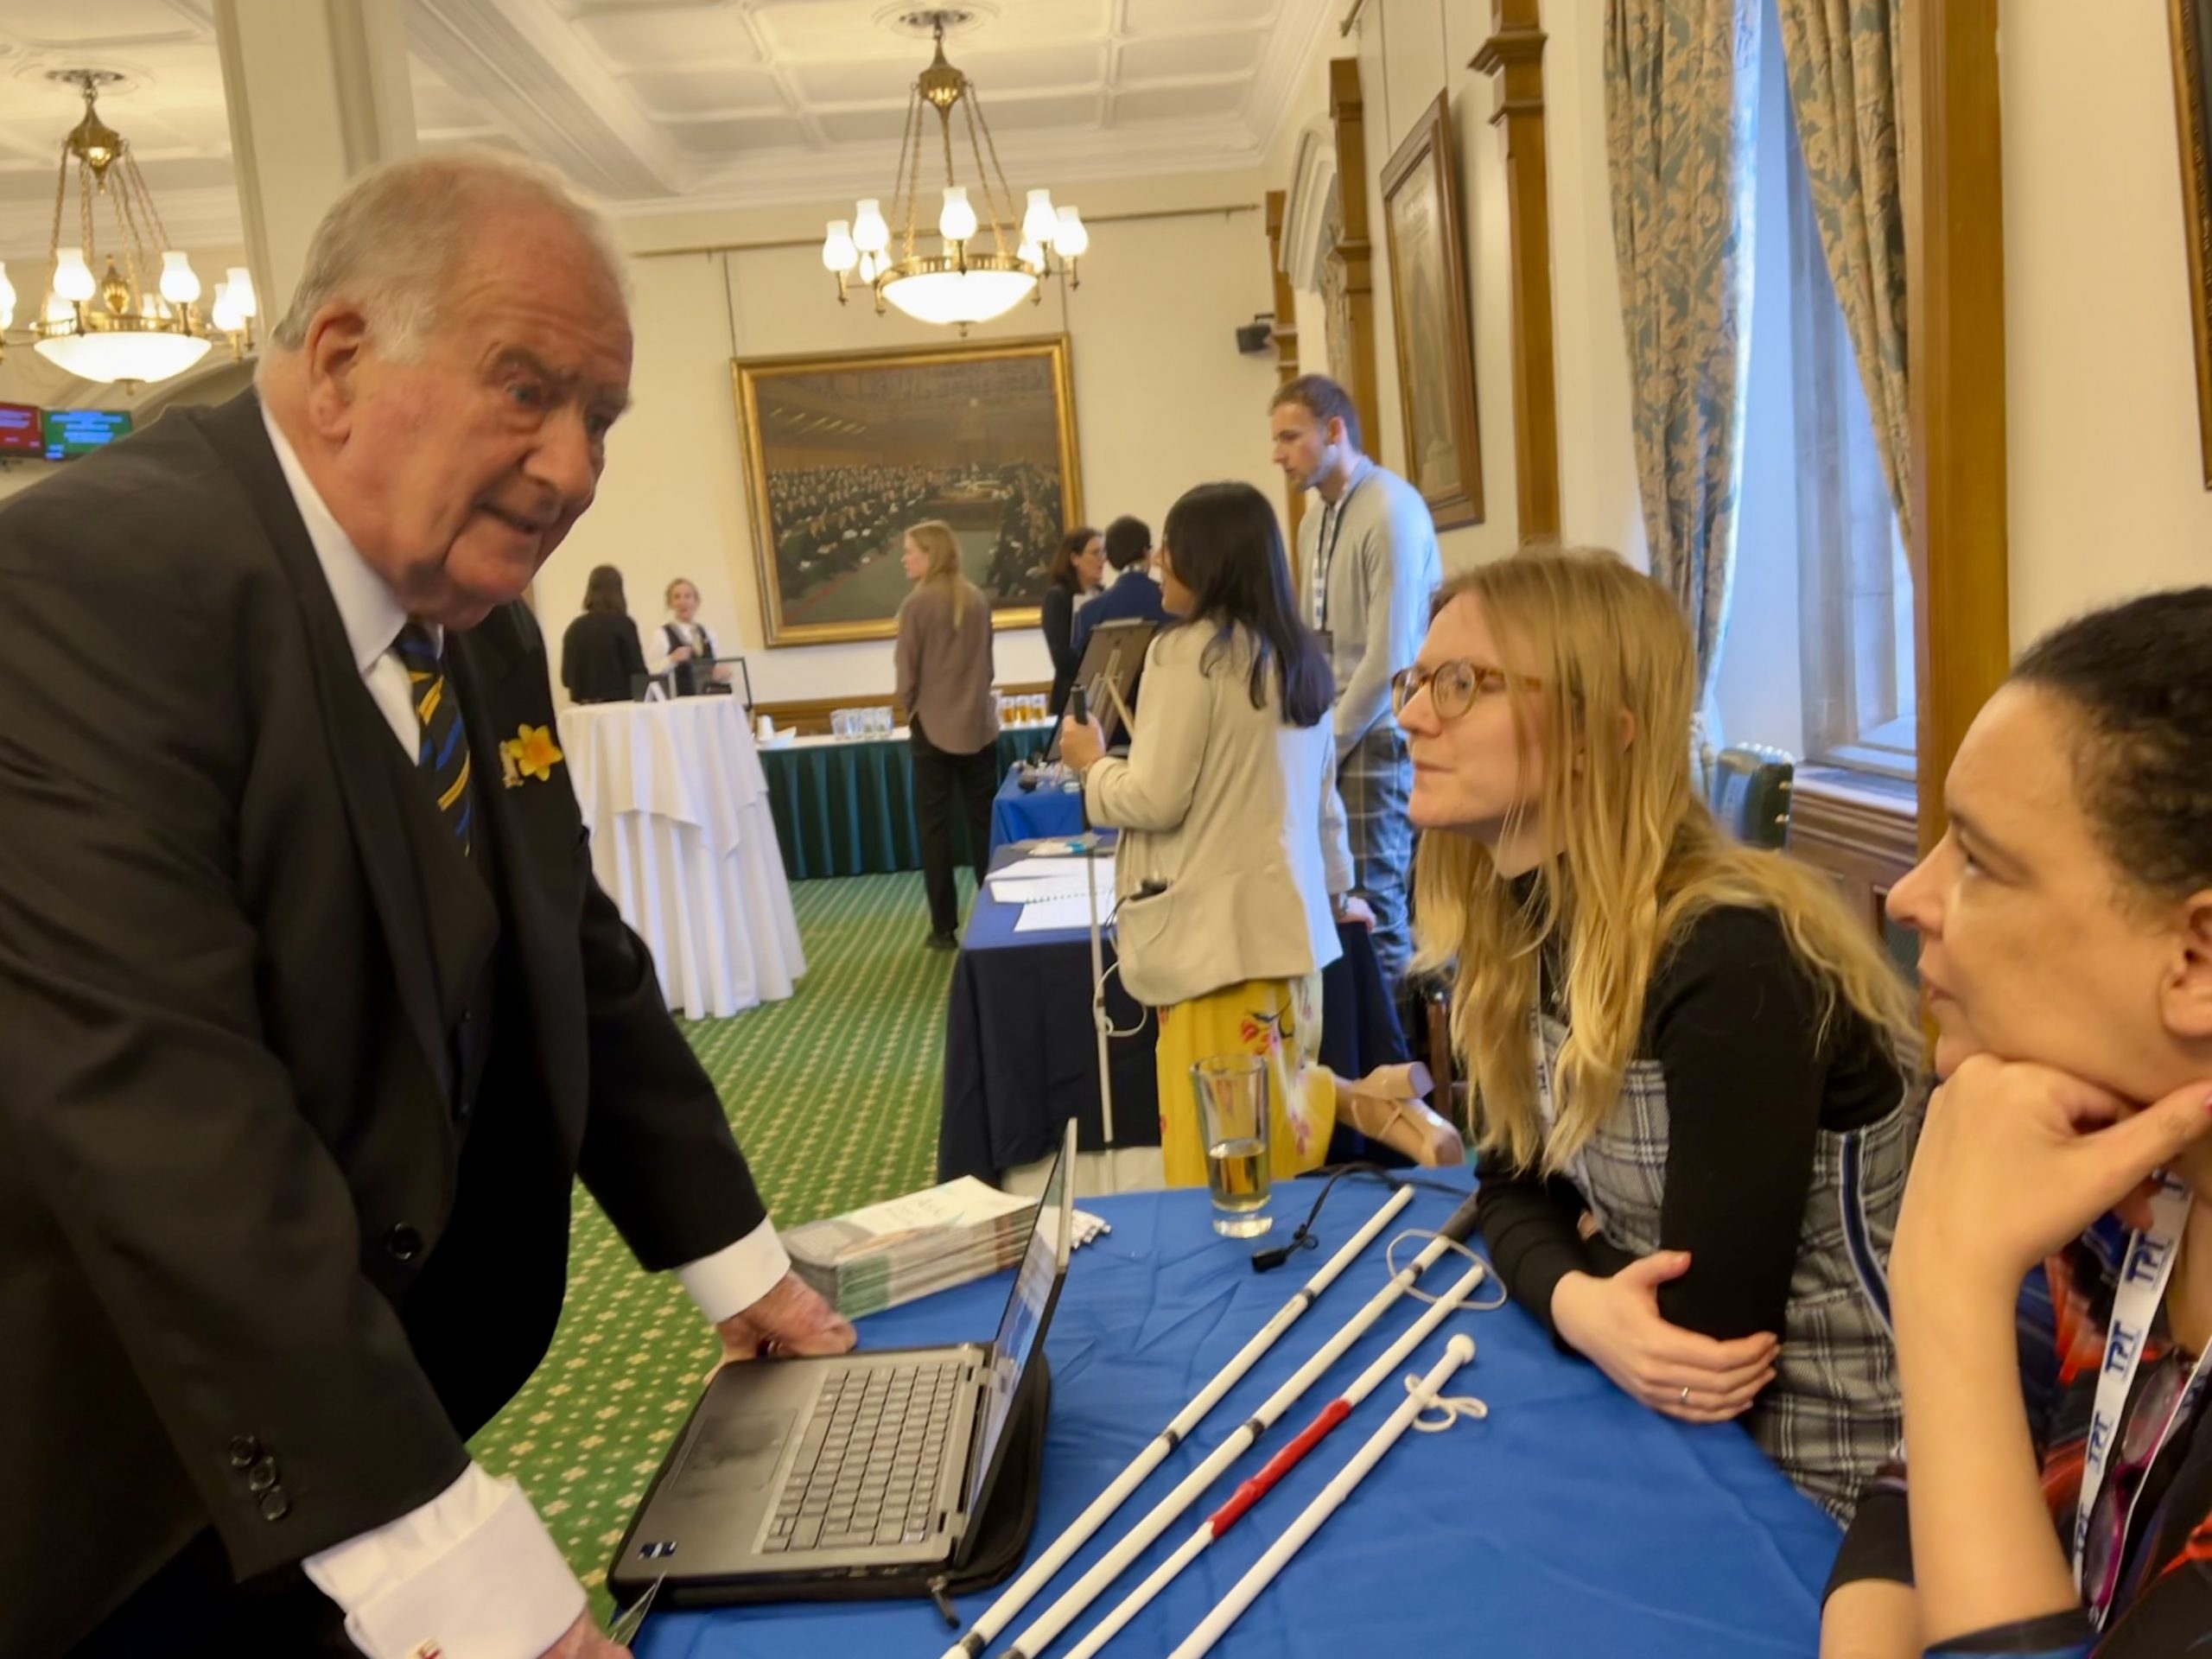 Sir Roger Gale, Deputy Speaker and MP, talking to Senior Engagement Manager Lucy WIlliams, and SLC volunteer Denise, at their built environment stand.